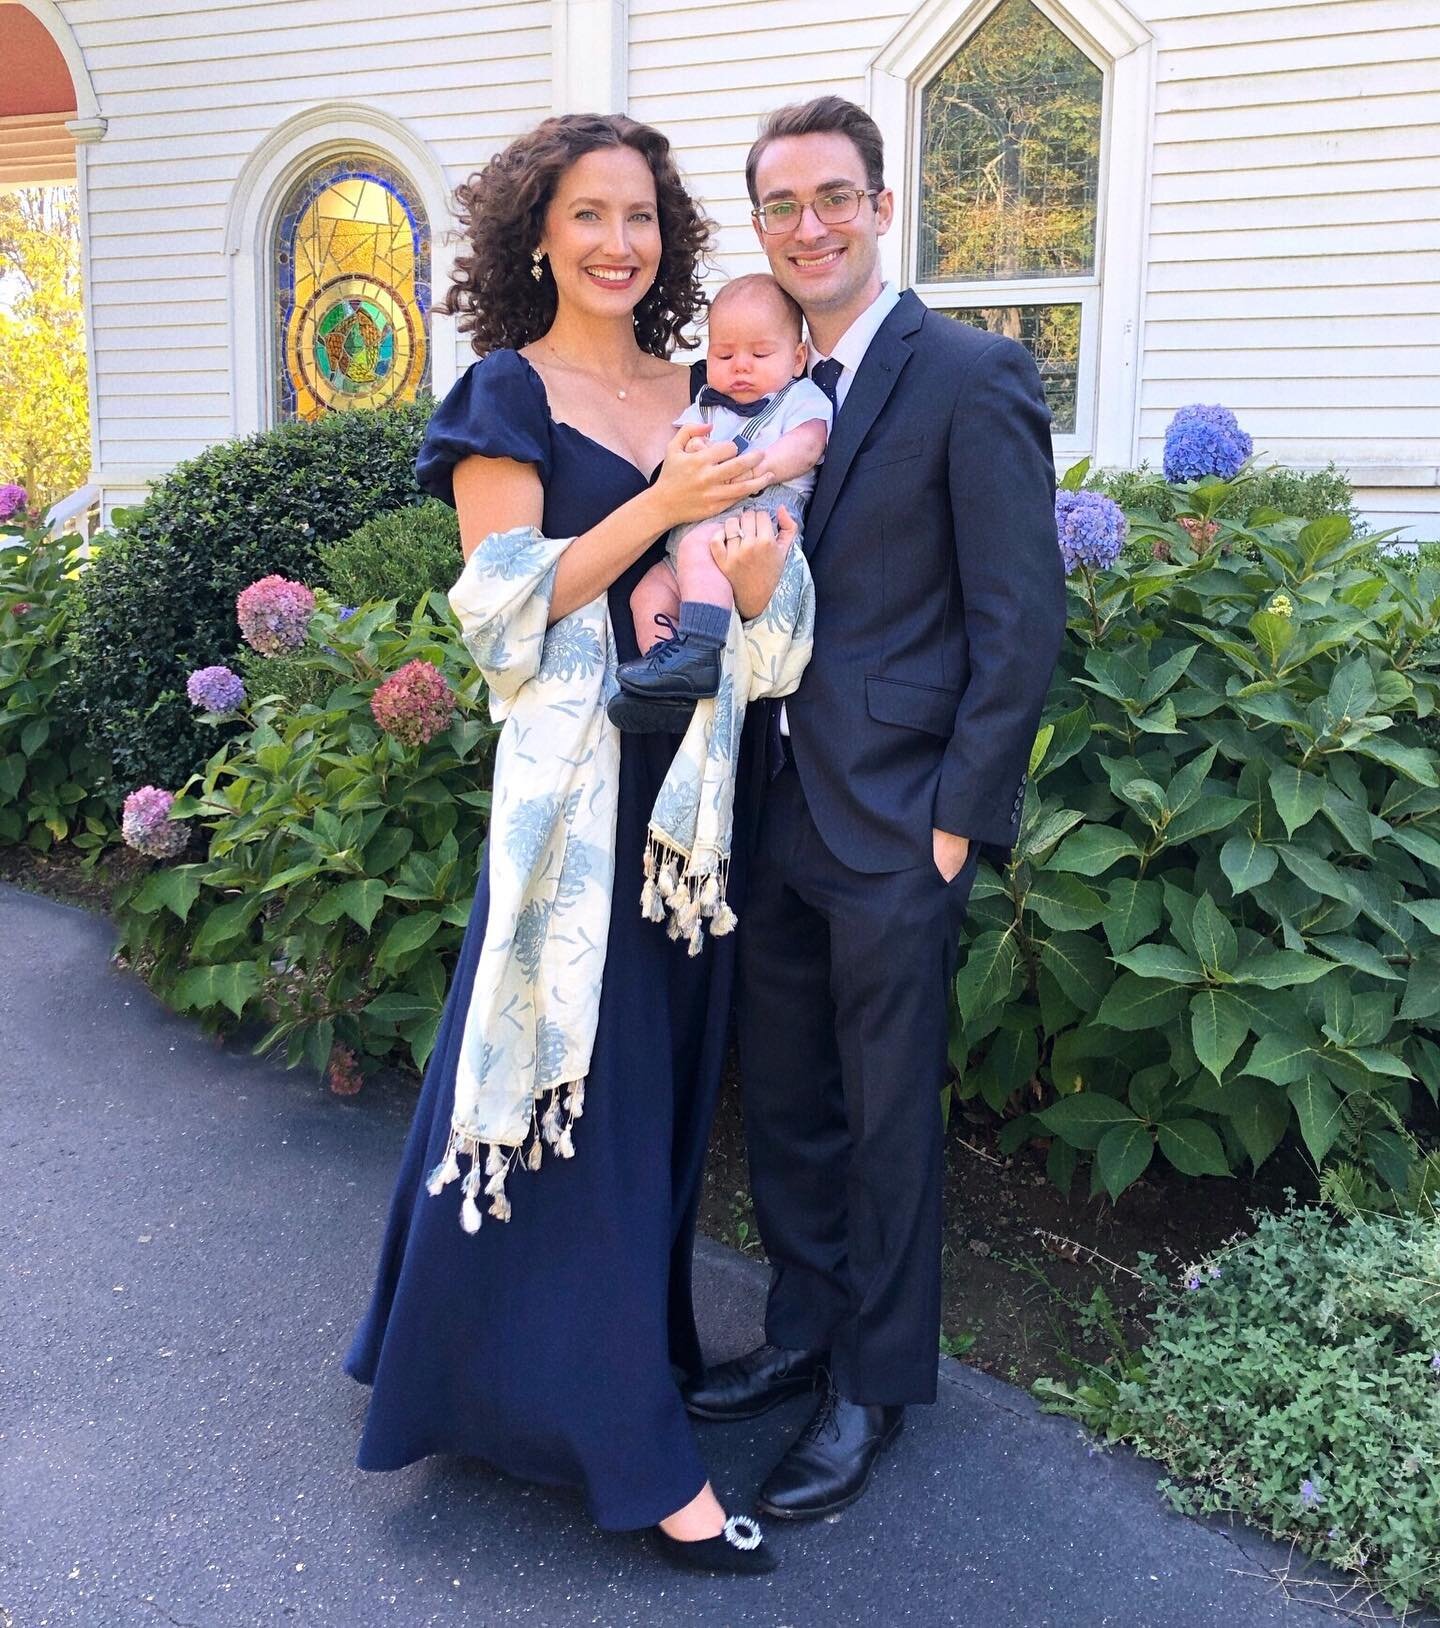 An absolute joy to celebrate and witness my cousin Jane wed her beloved William. It was a gorgeous day brimming with the joy of reunited family, a moving service filled with music and scripture that elevated the mind and spirit, and food that dazzled